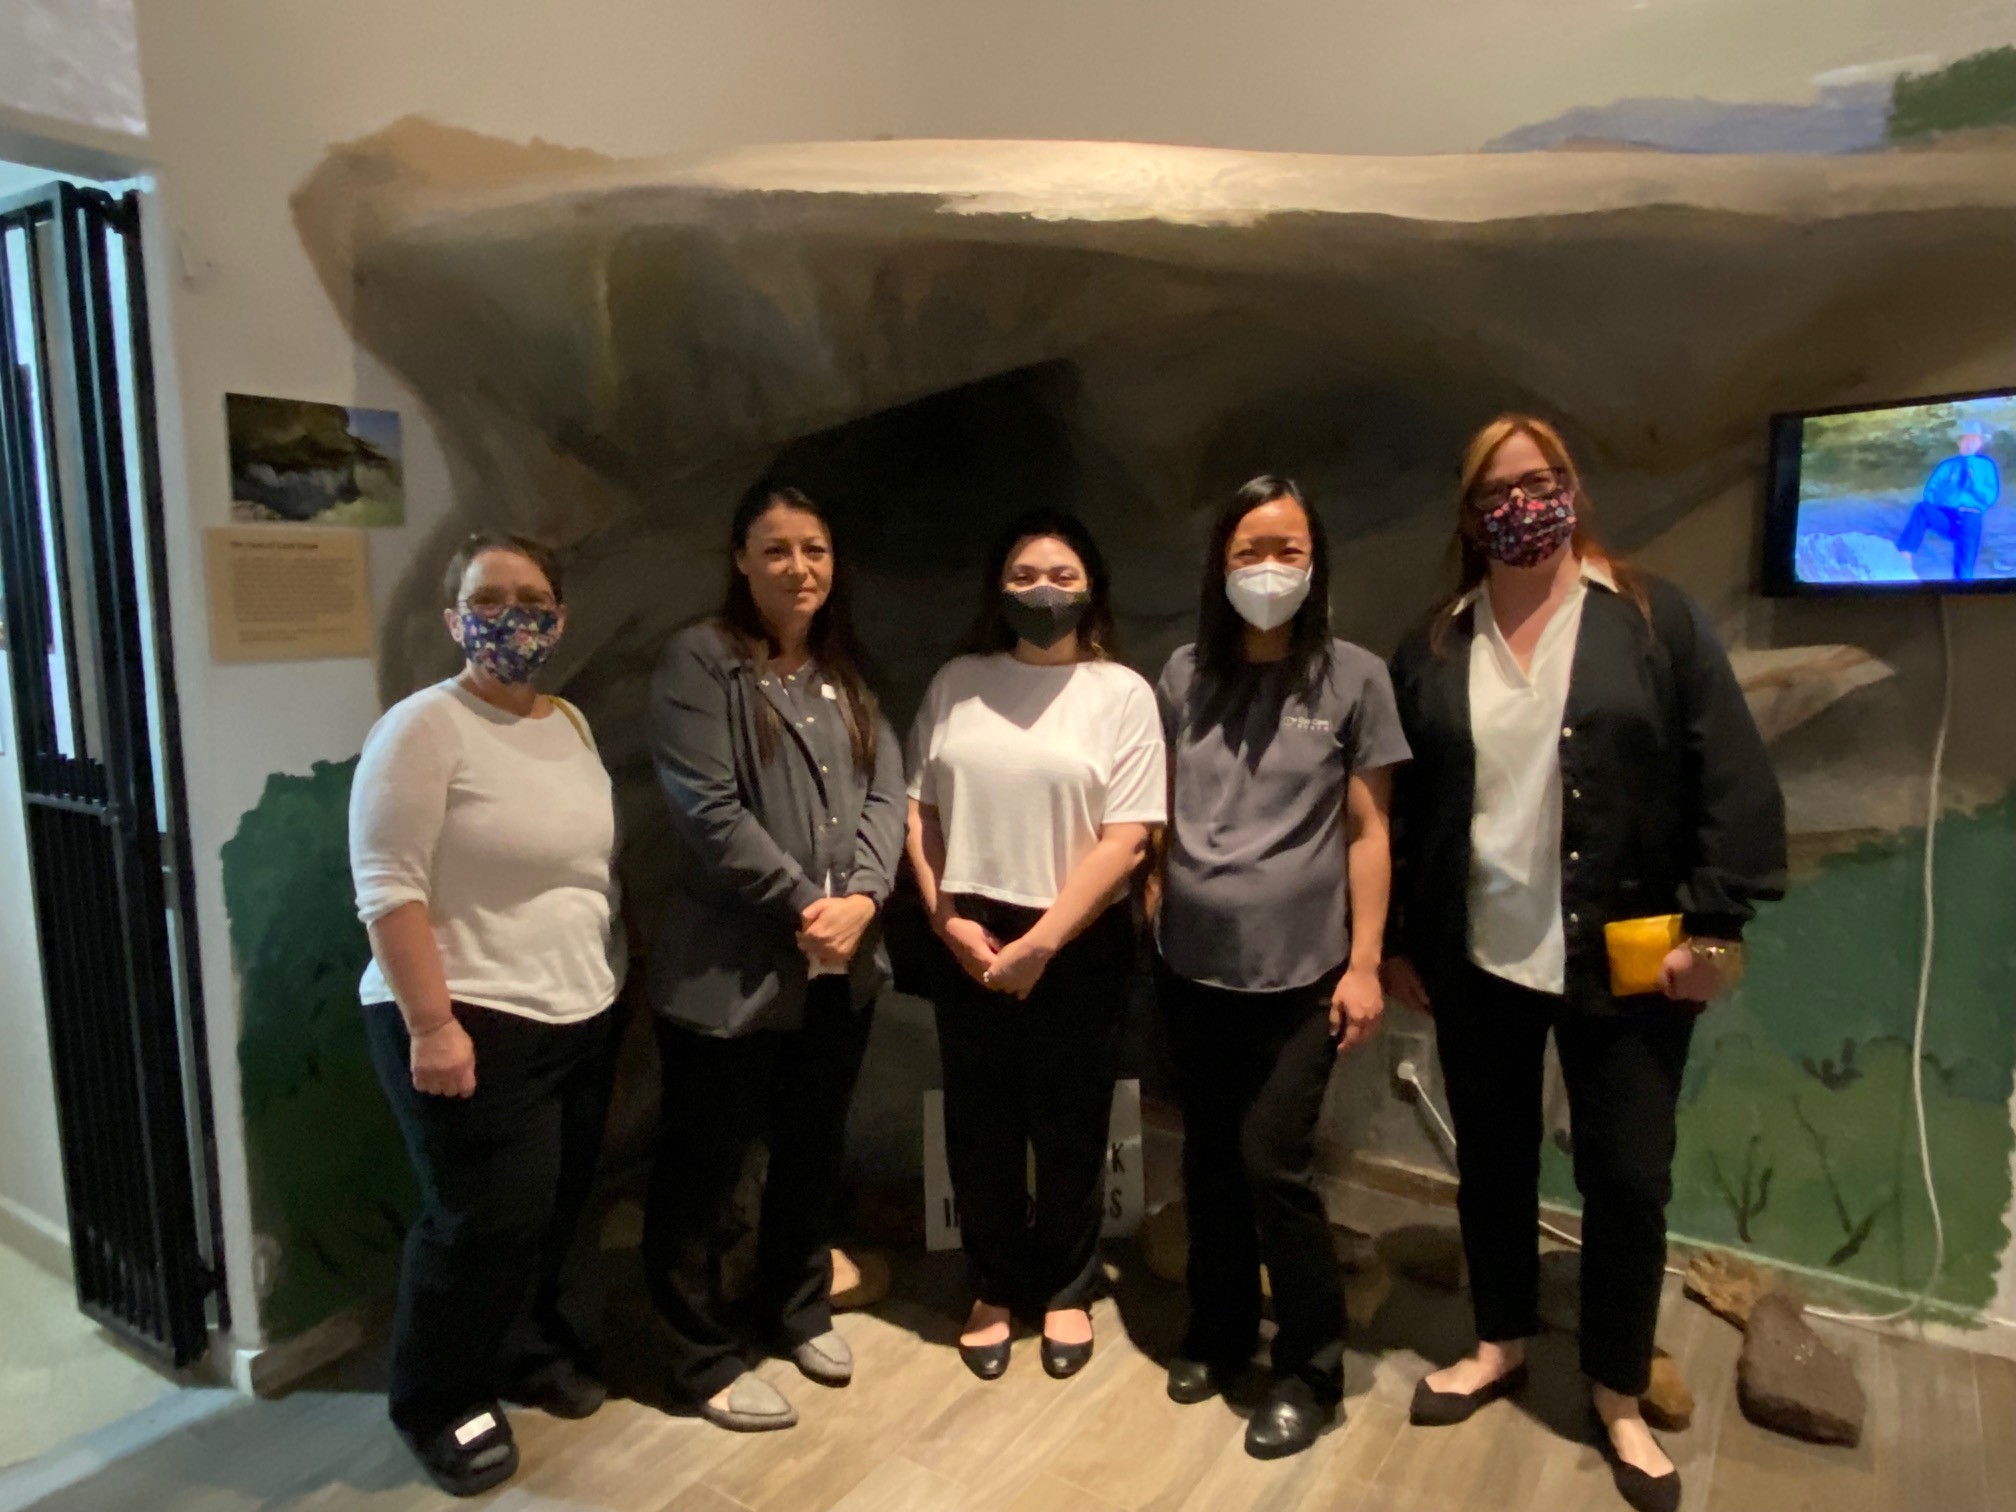 Eye Care North at the Cave Creek Museum